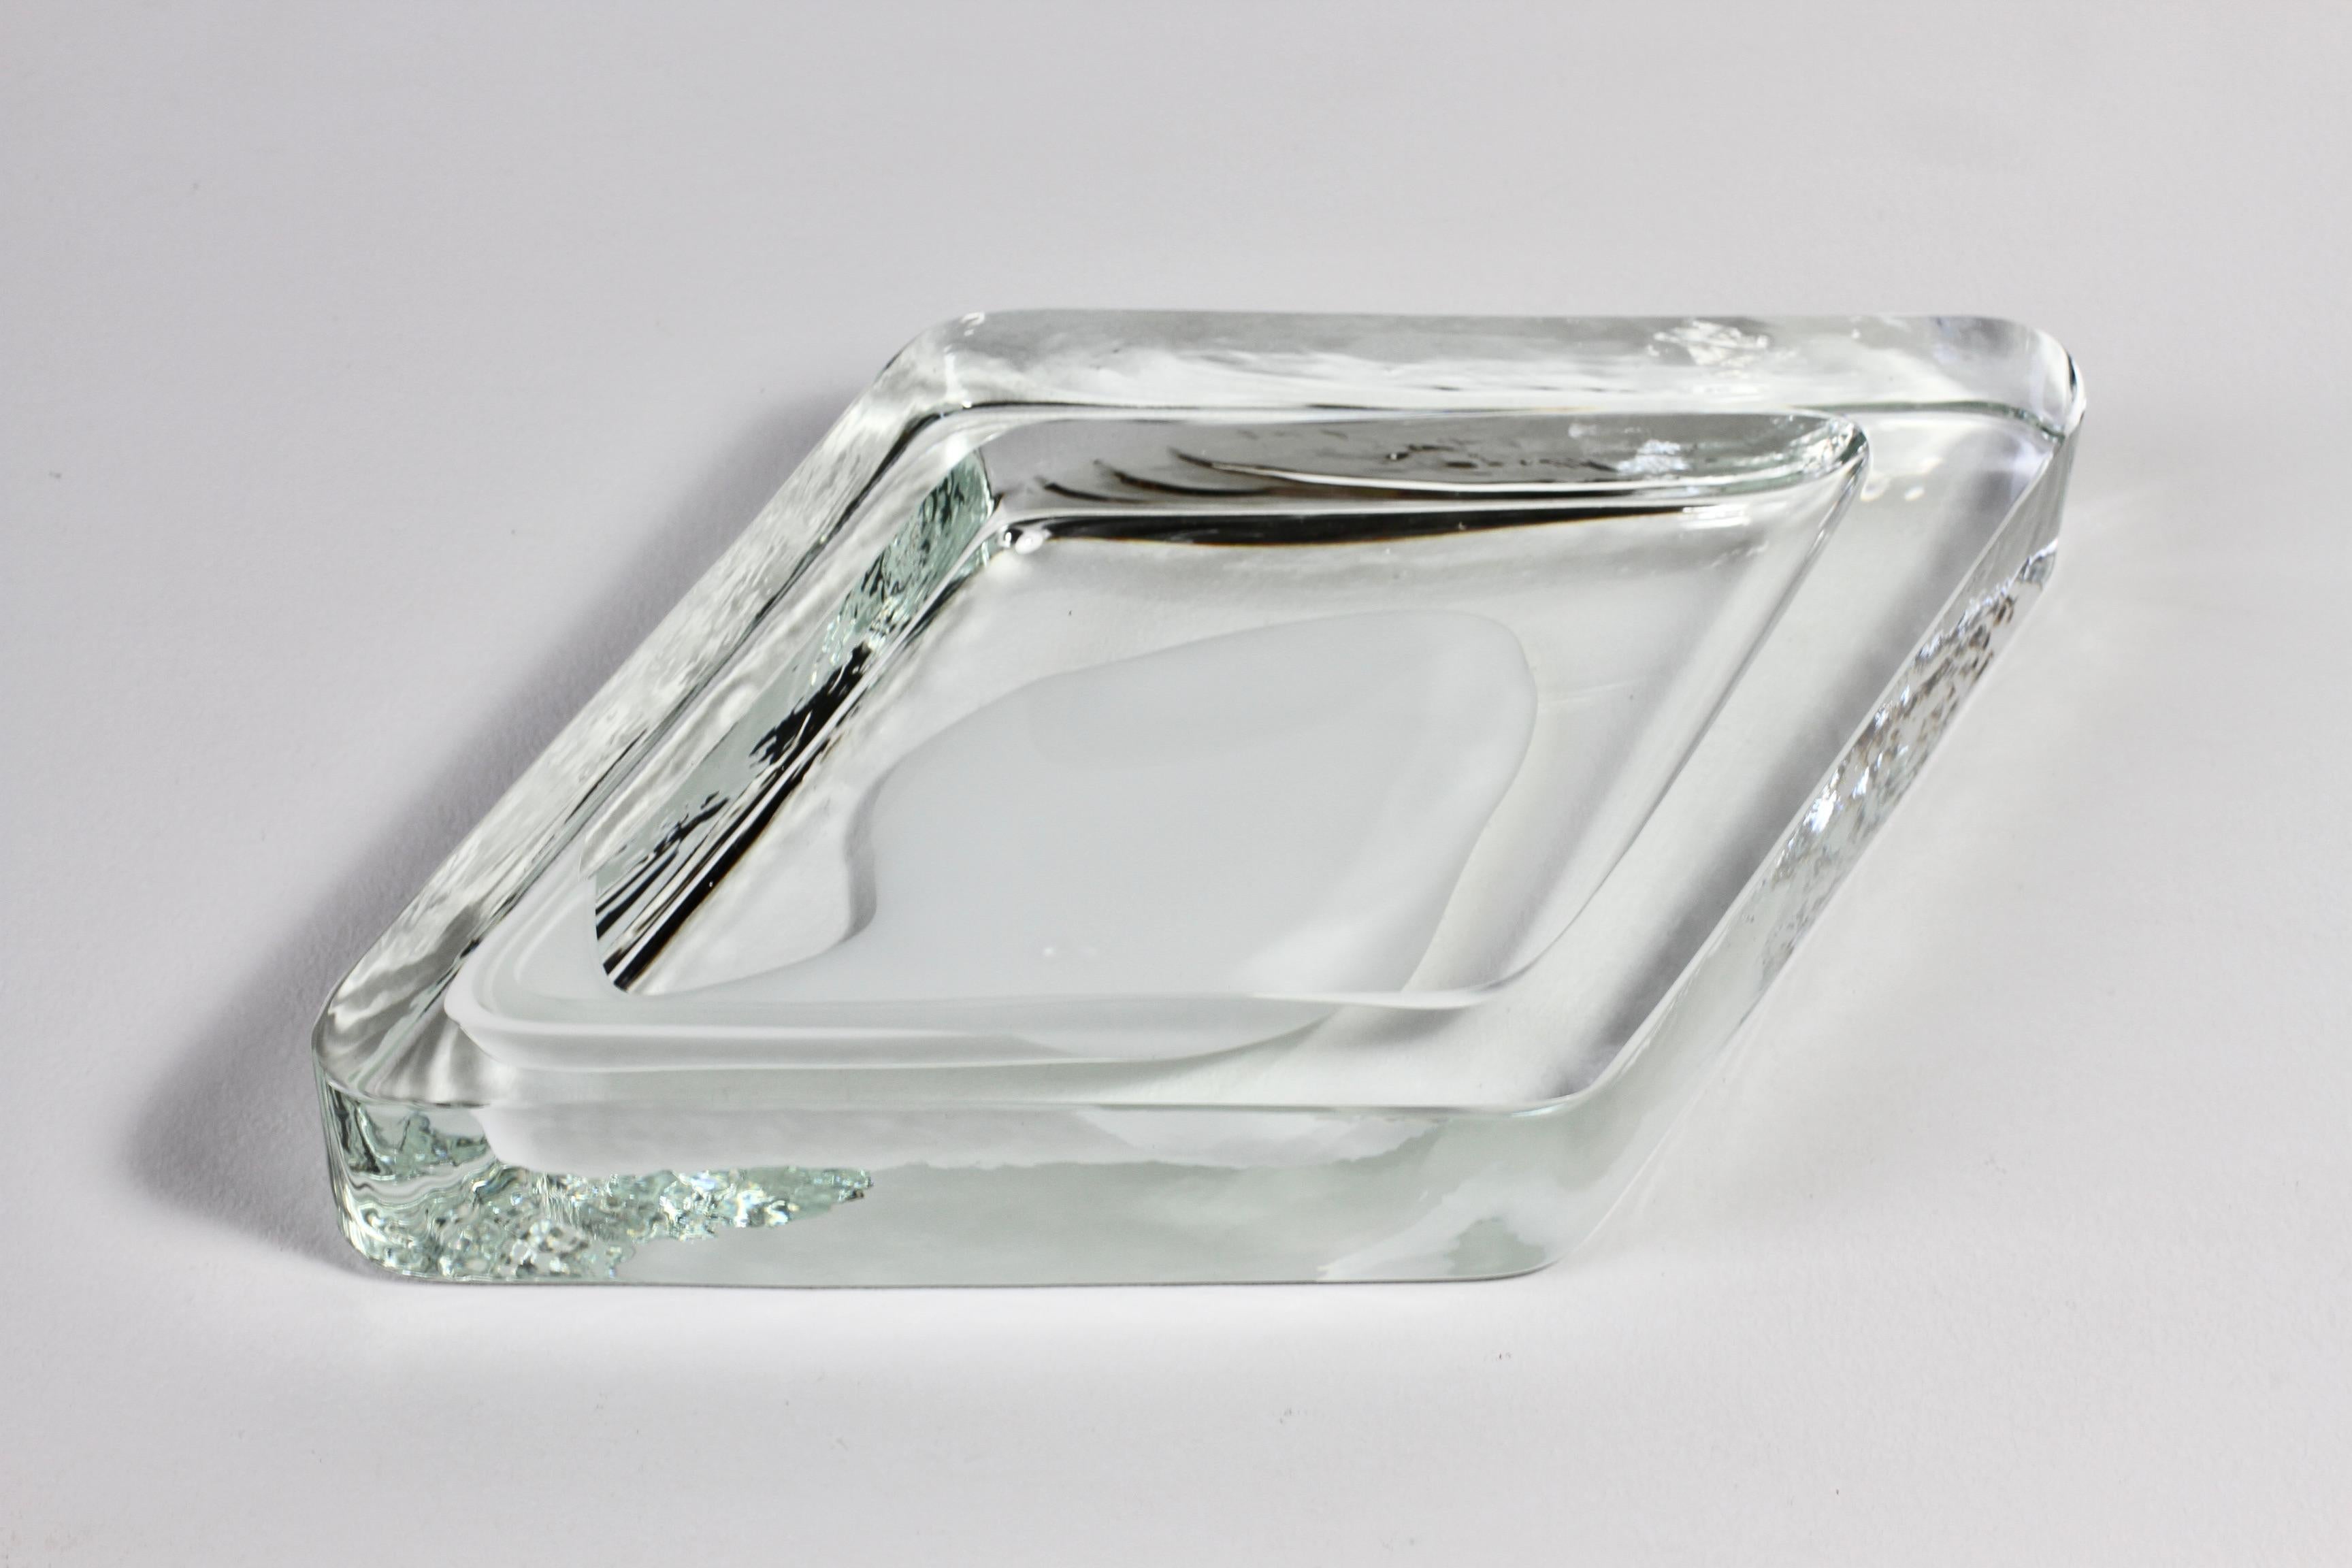 Huge Cenedese Italian Rhombus White and Clear Murano Glass Bowl, Dish, Ashtray For Sale 11